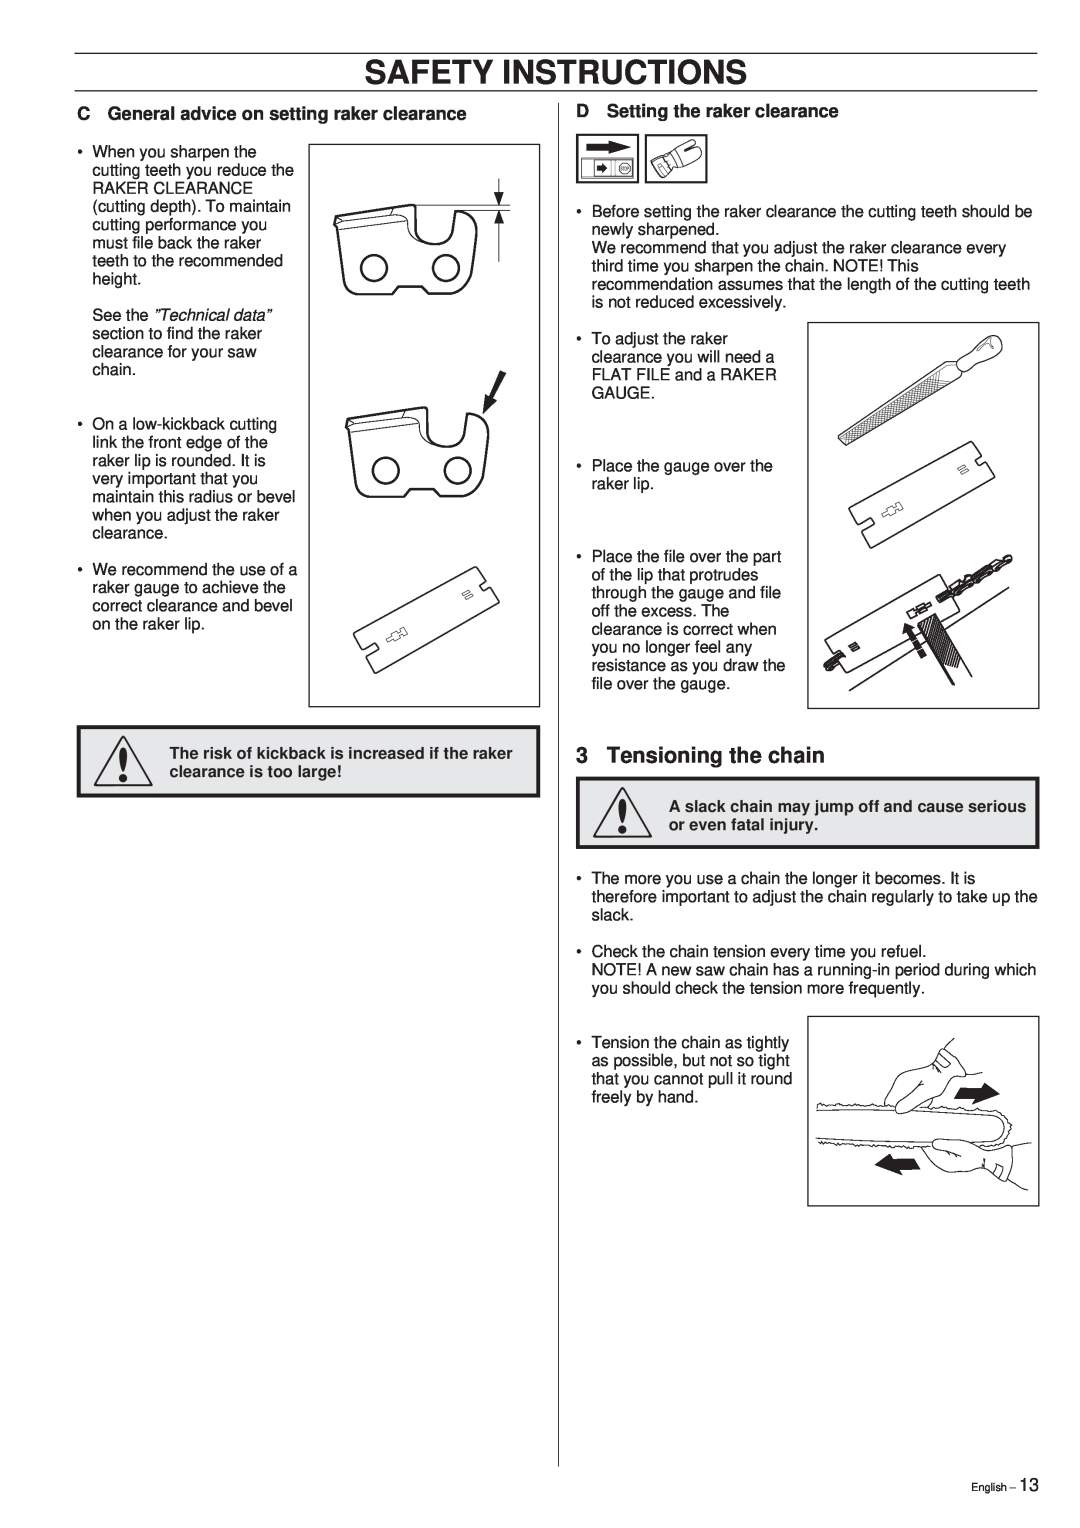 Husqvarna 261 manual Safety Instructions, Tensioning the chain, C General advice on setting raker clearance 